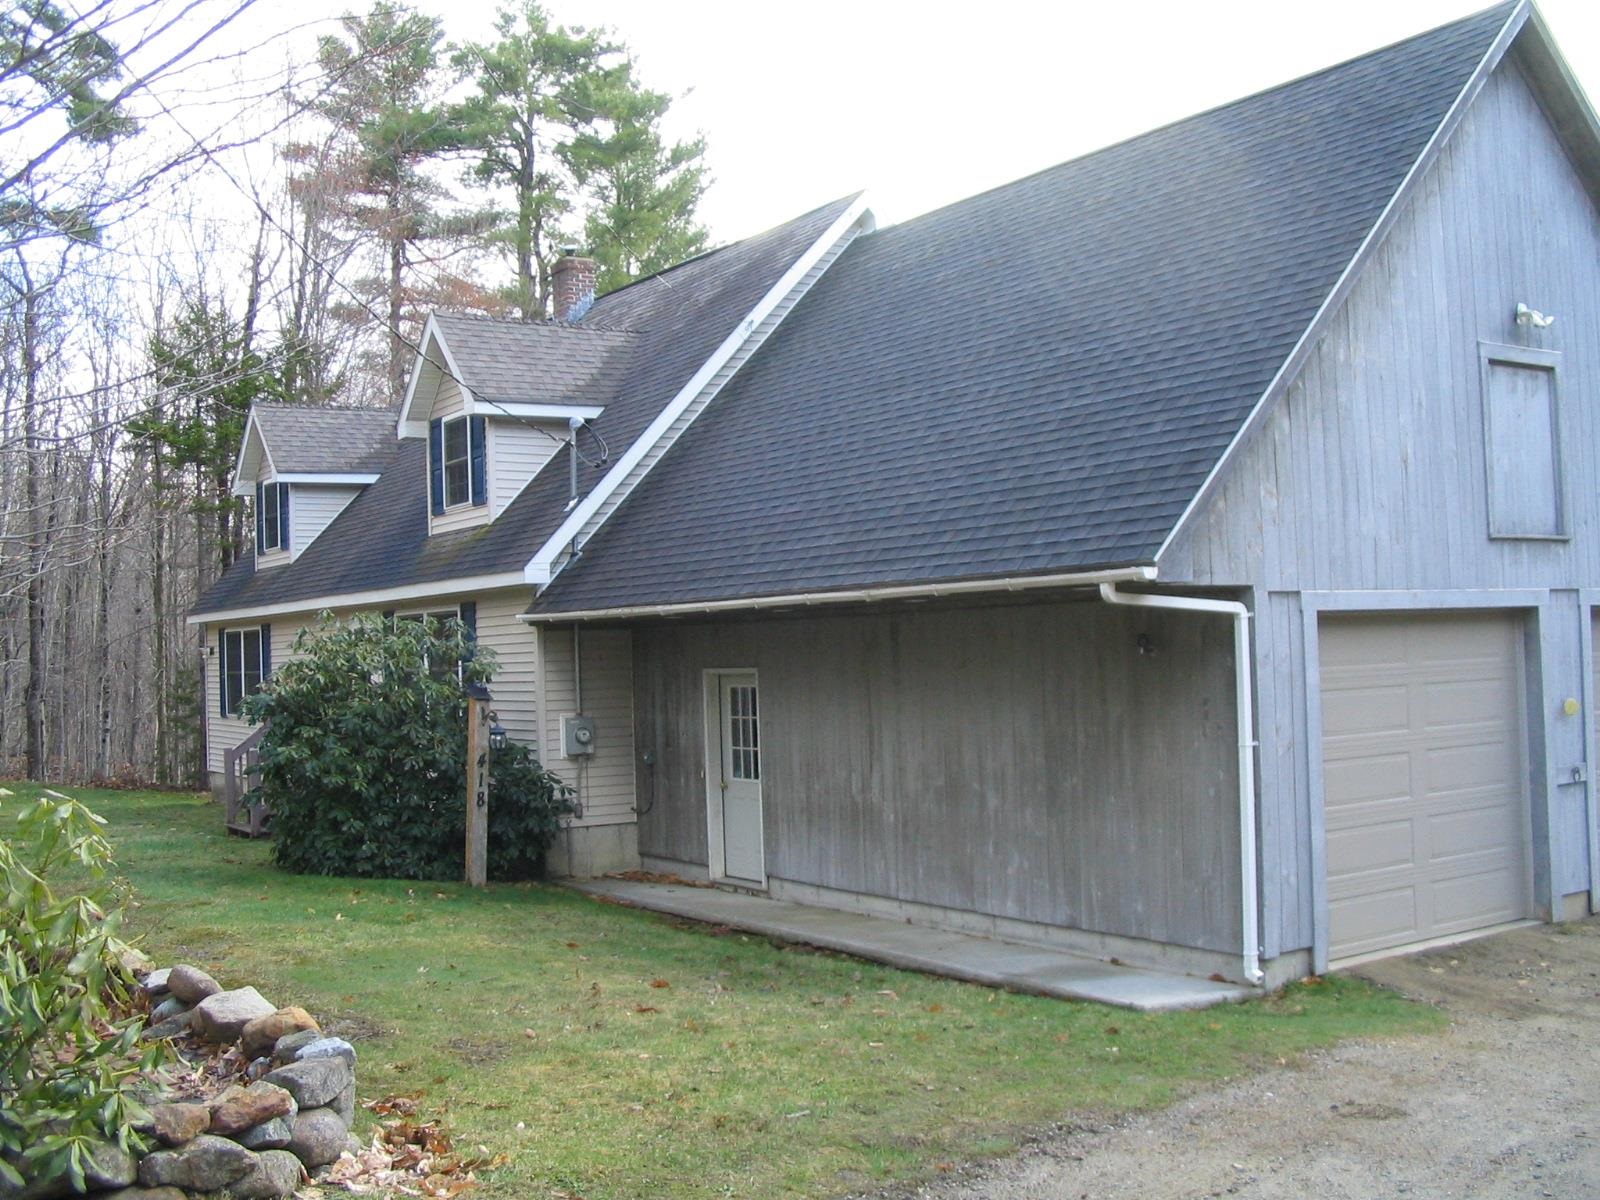 418 Old Stoddard Road, Nelson, NH 03457